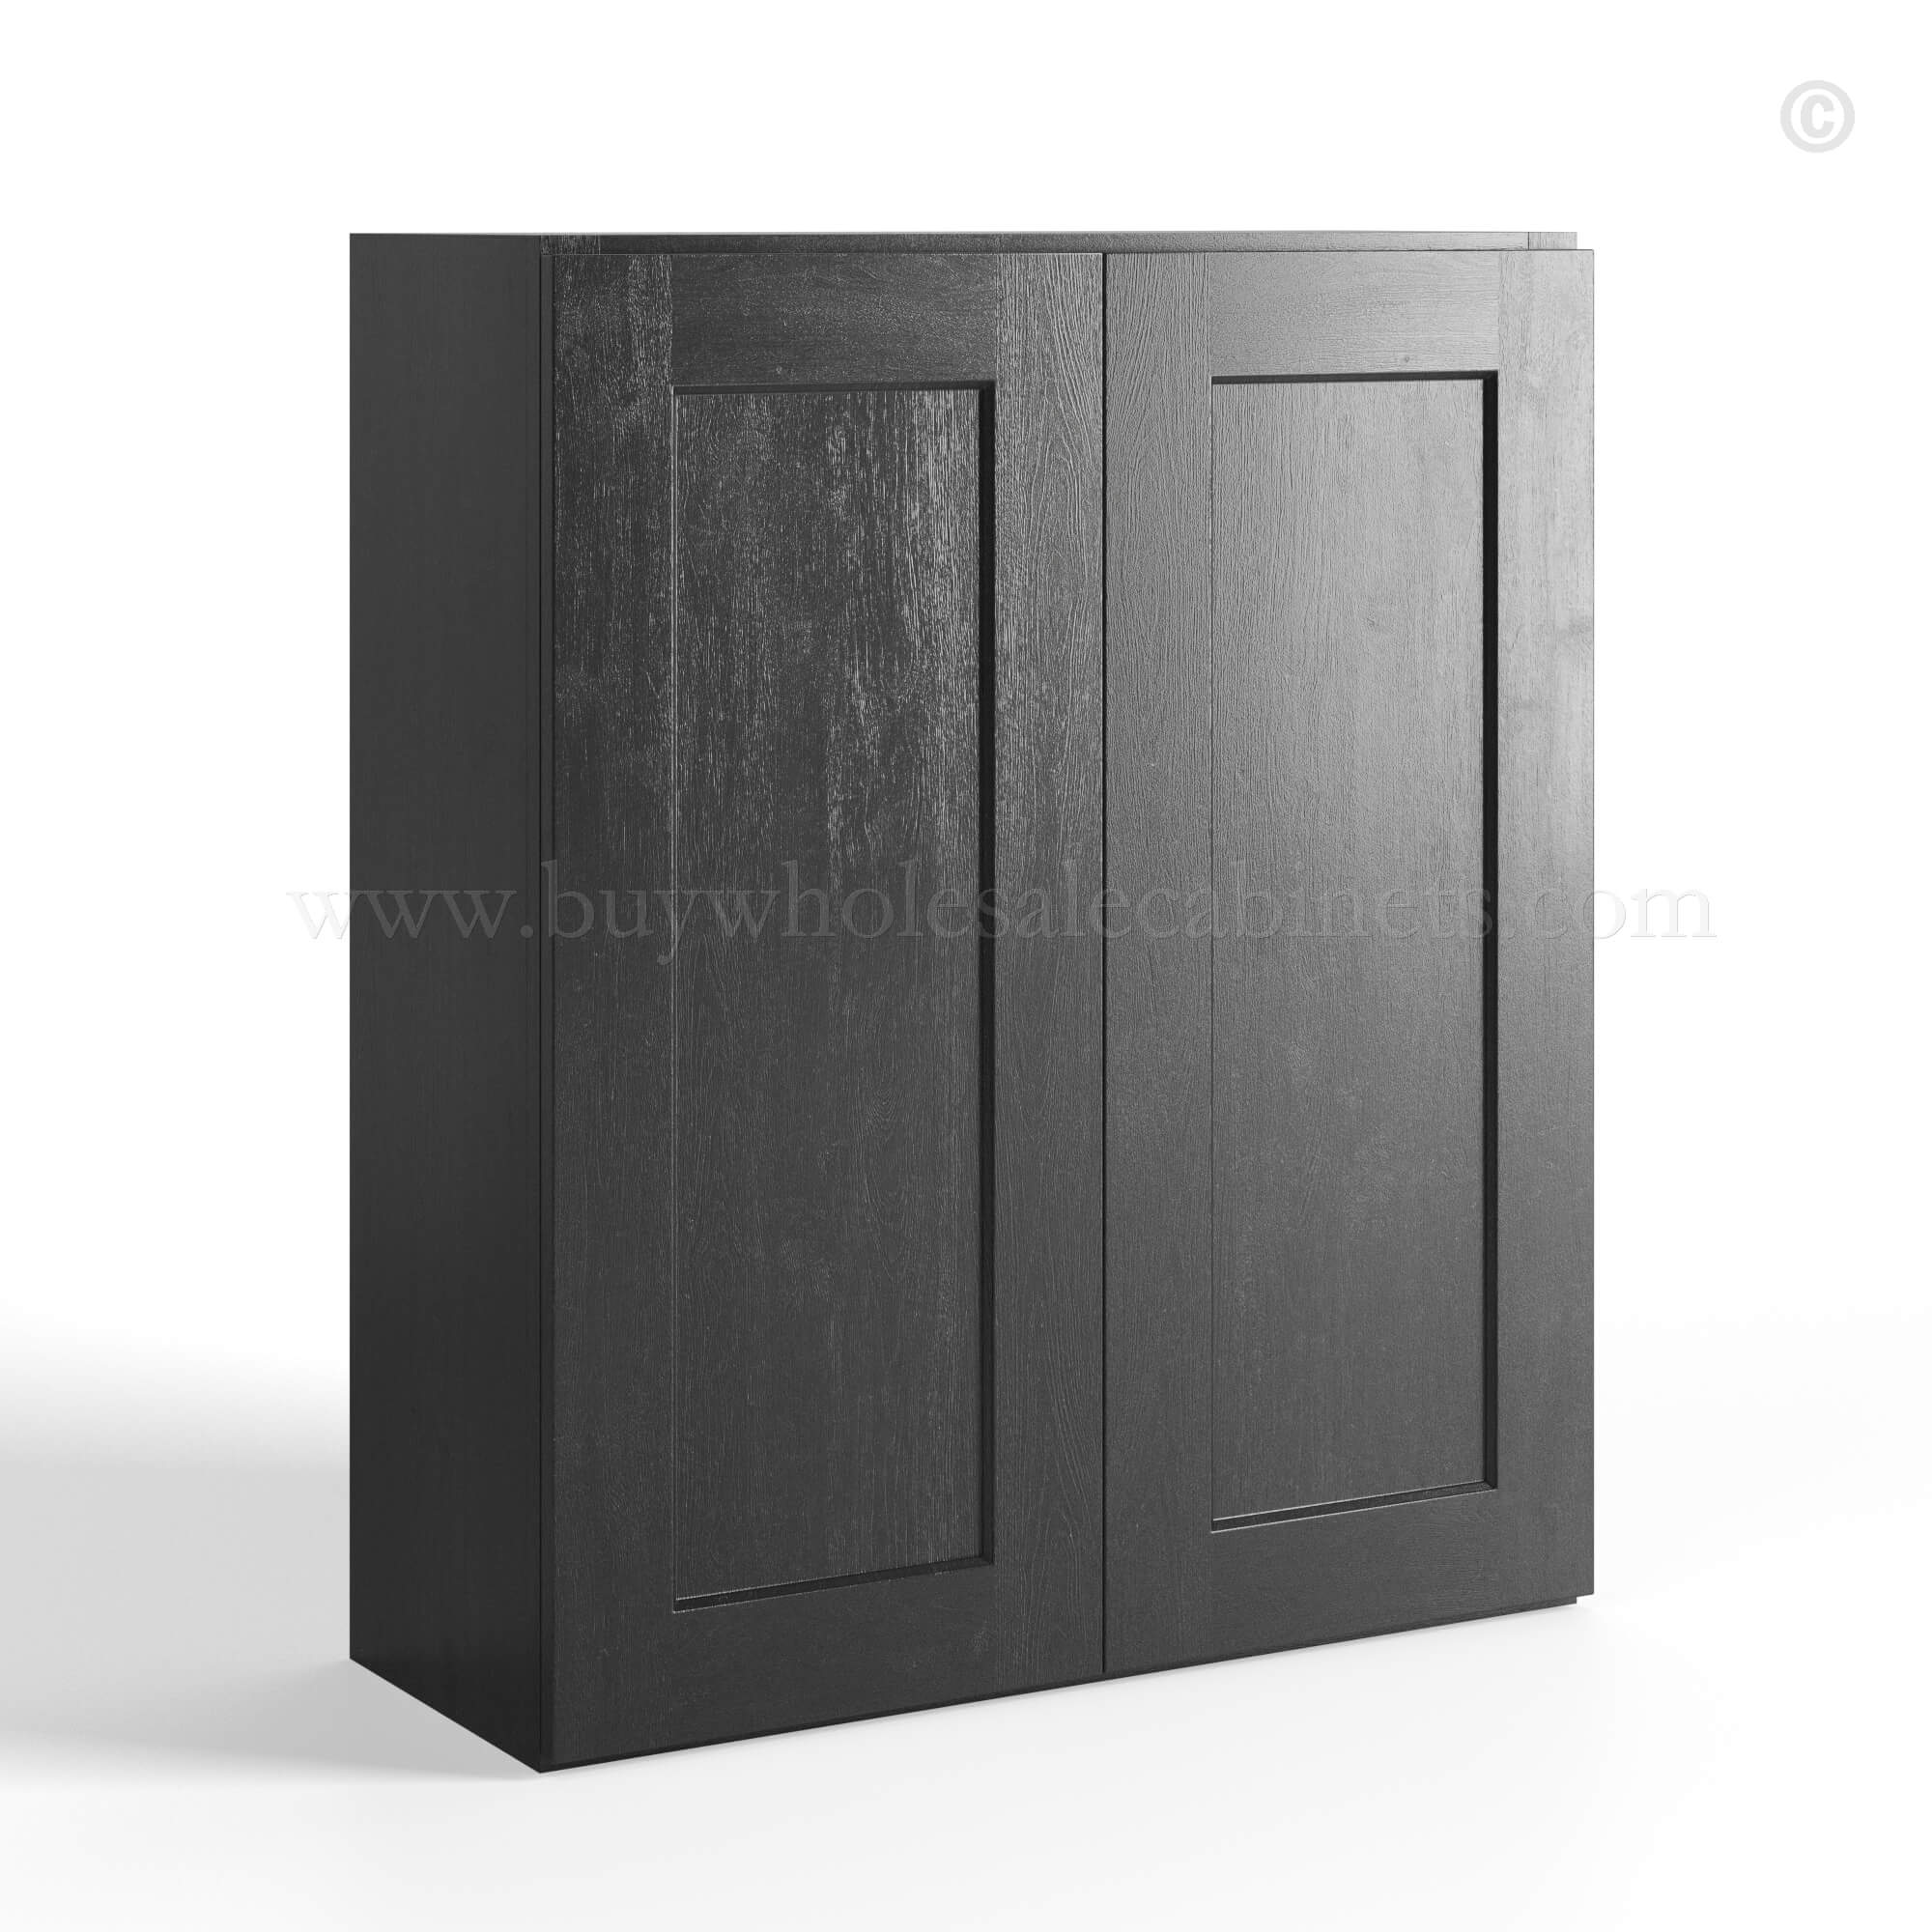 Charcoal Black Shaker Double Door Wall Cabinets 30H, rta cabinets, wholesale cabinets